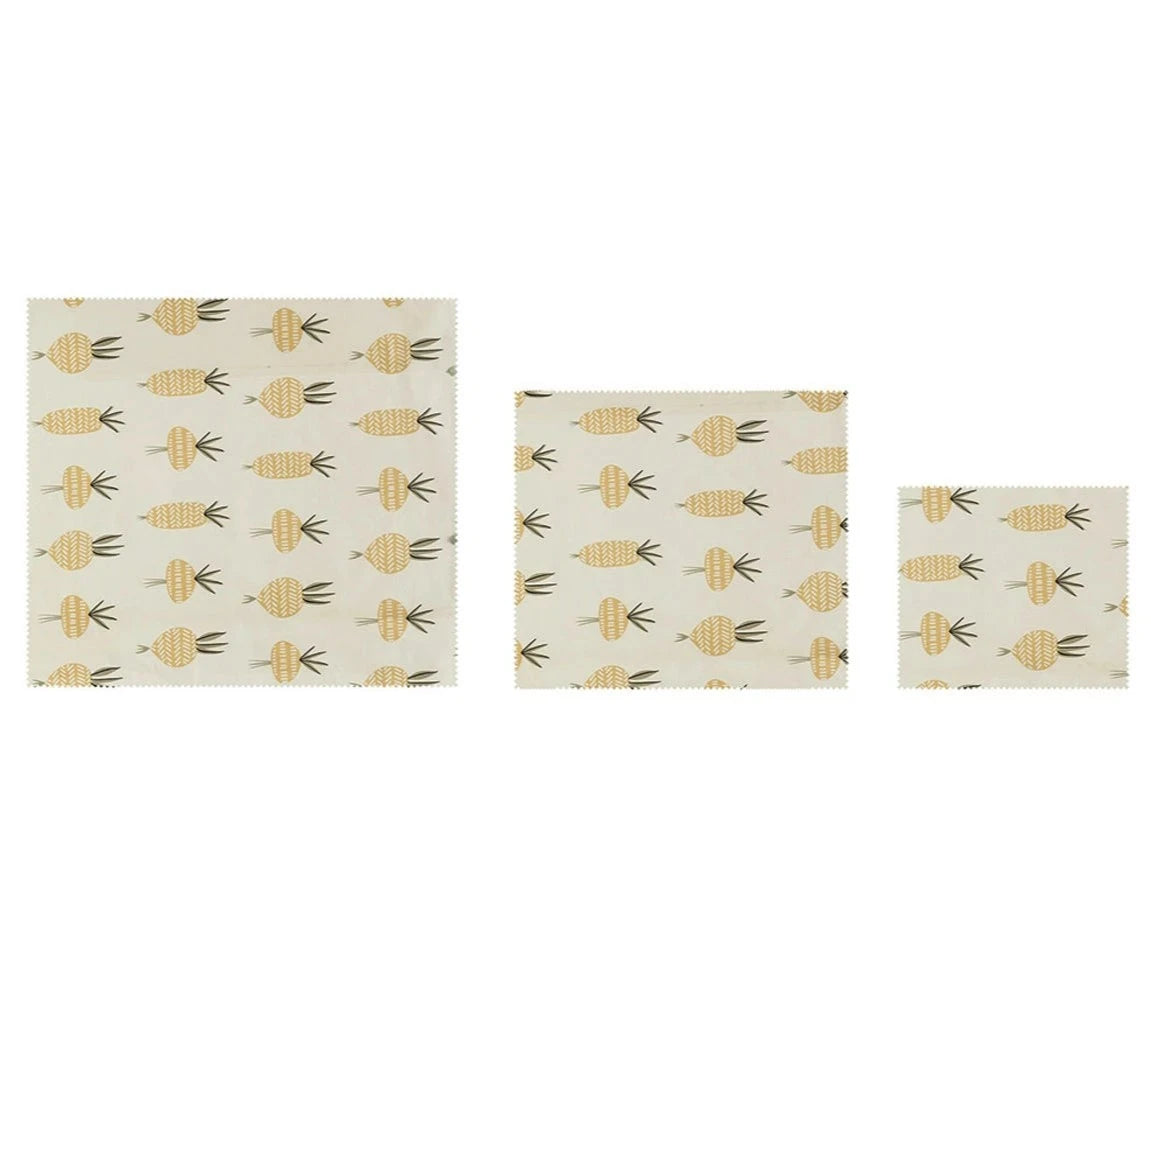 Set of 3 Square Reusable Fabric Beeswax Food Covers with Prints